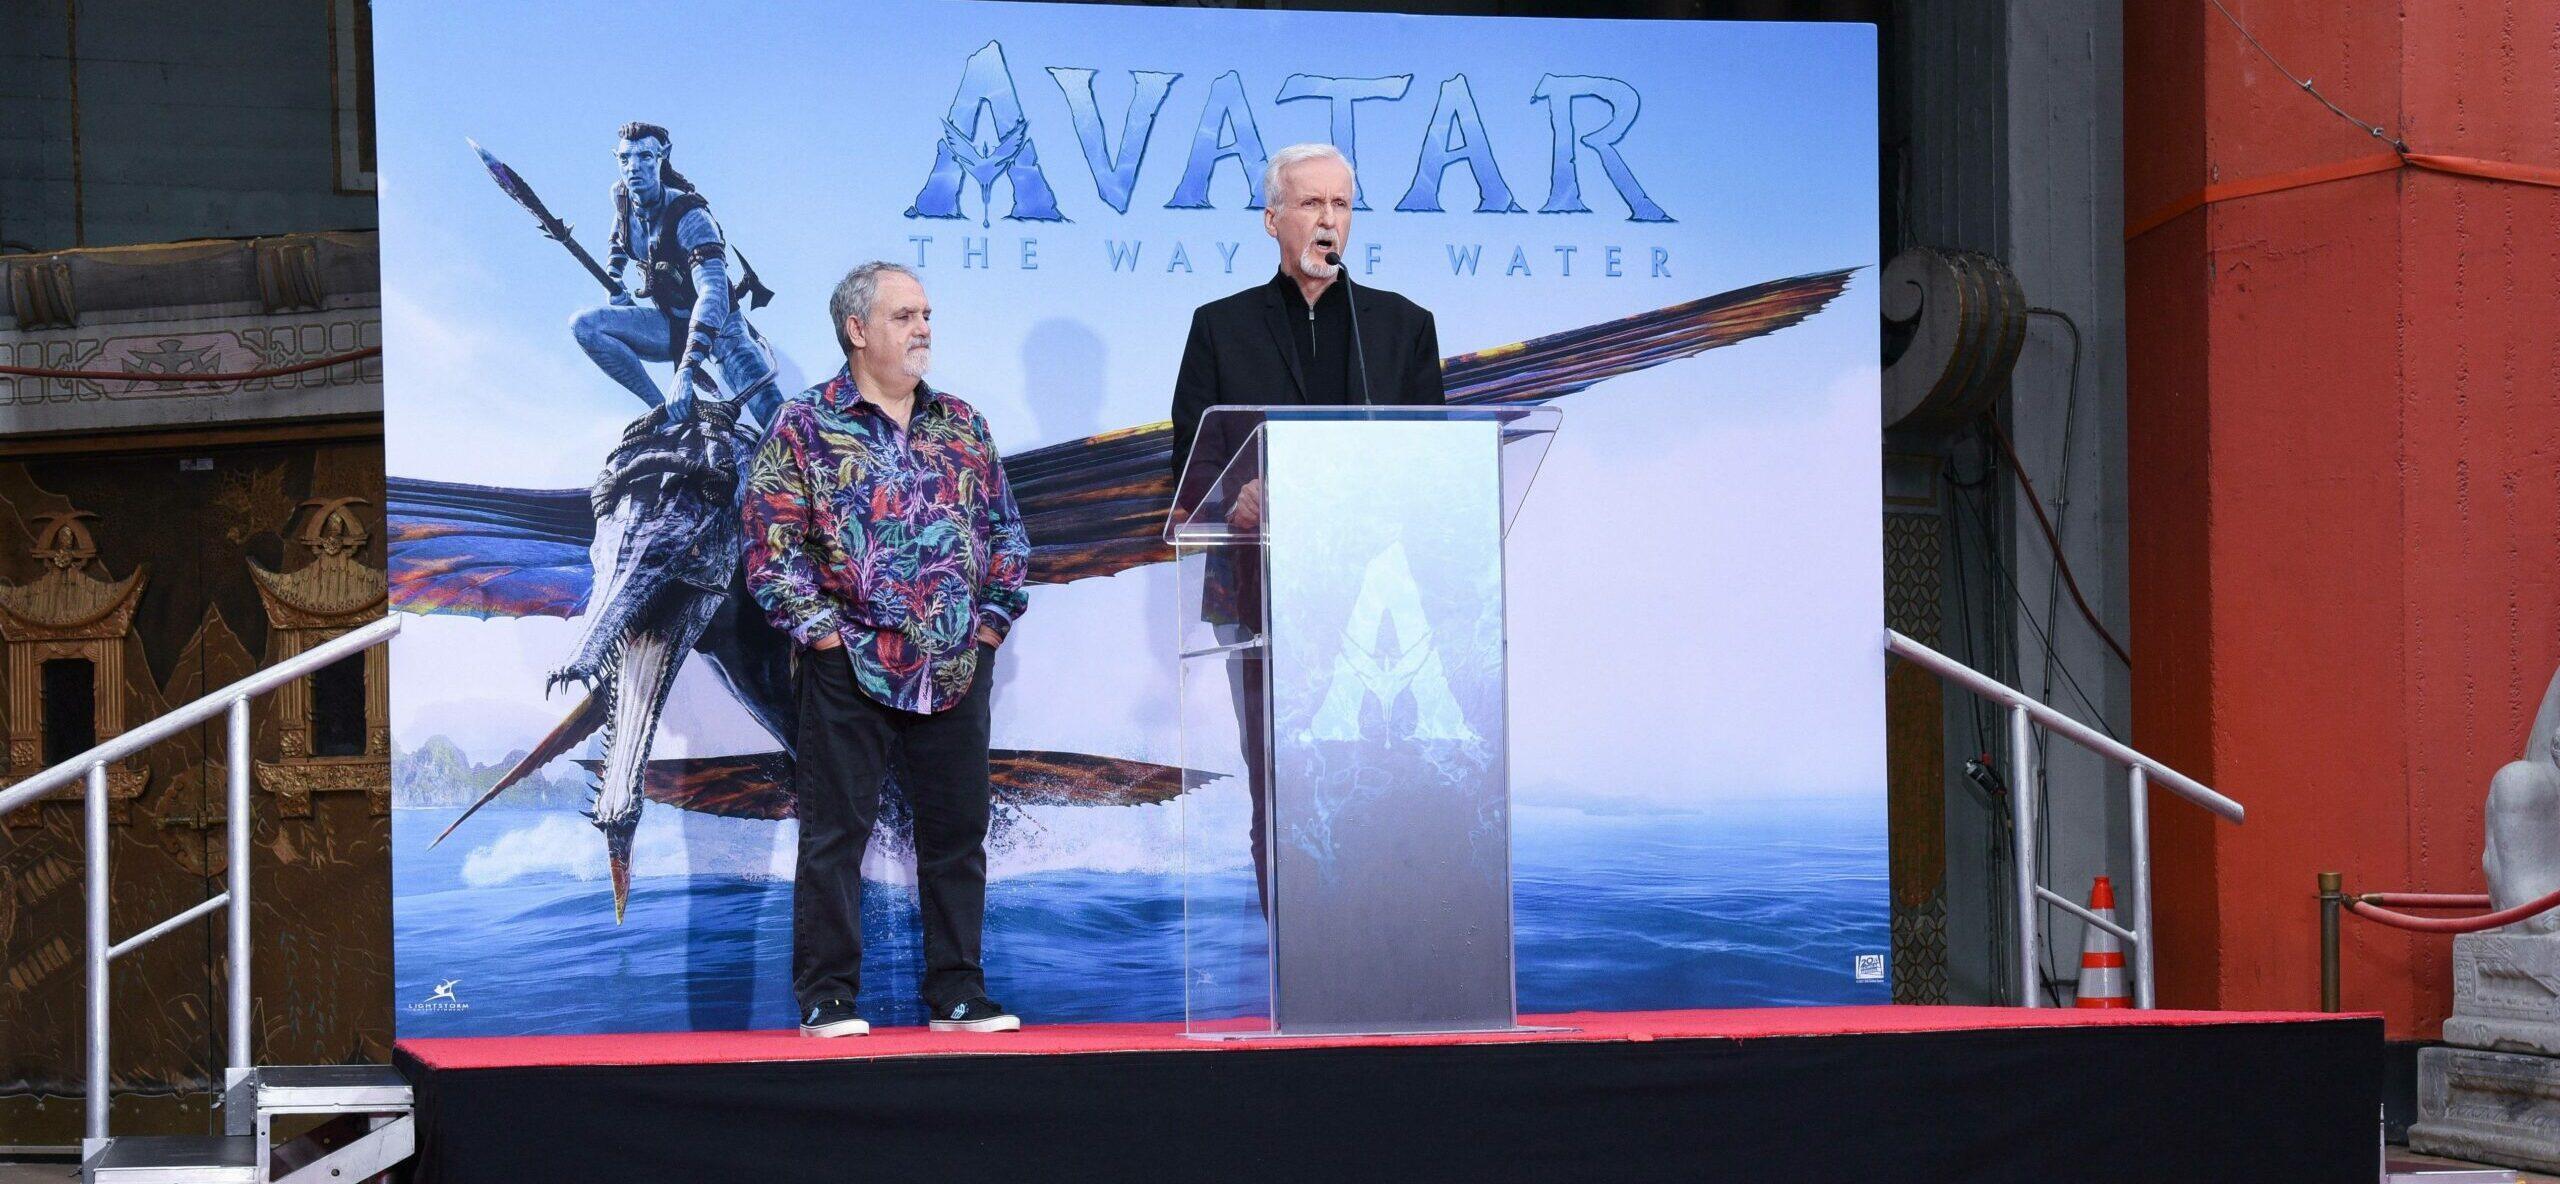 Avatar: The Way of Water - James Cameron And Jon Landau Hand And Footprint In Cement Ceremony